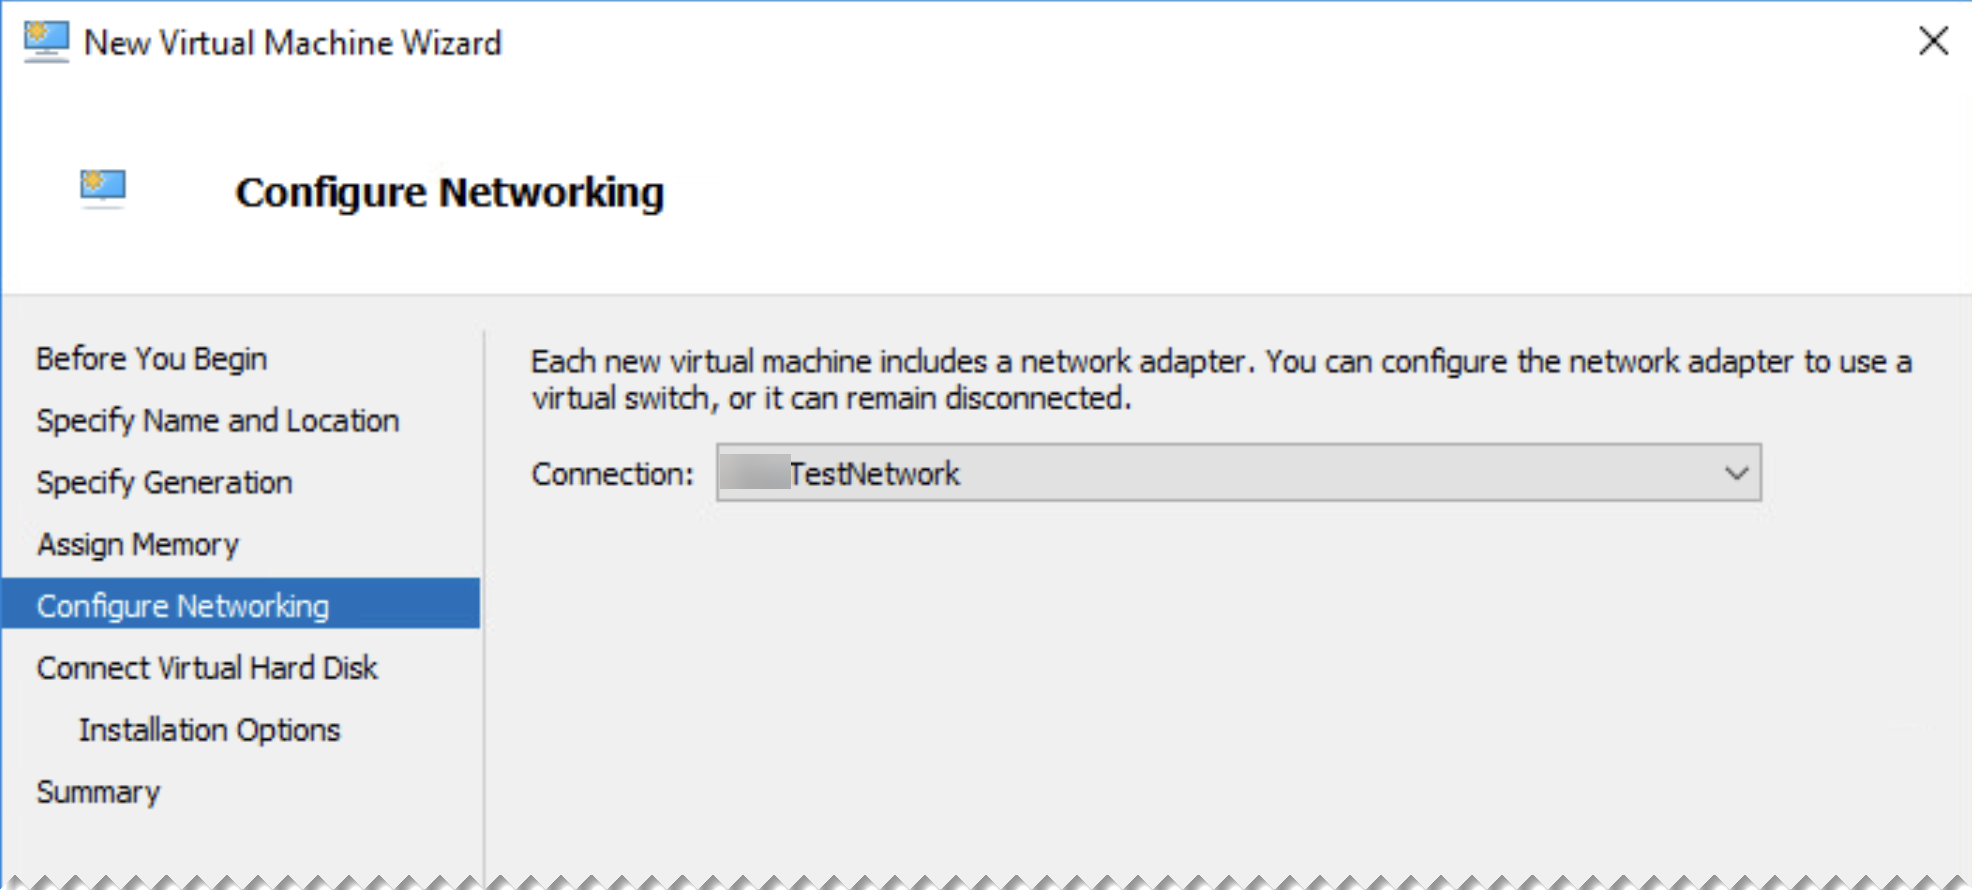 Configure Networking page